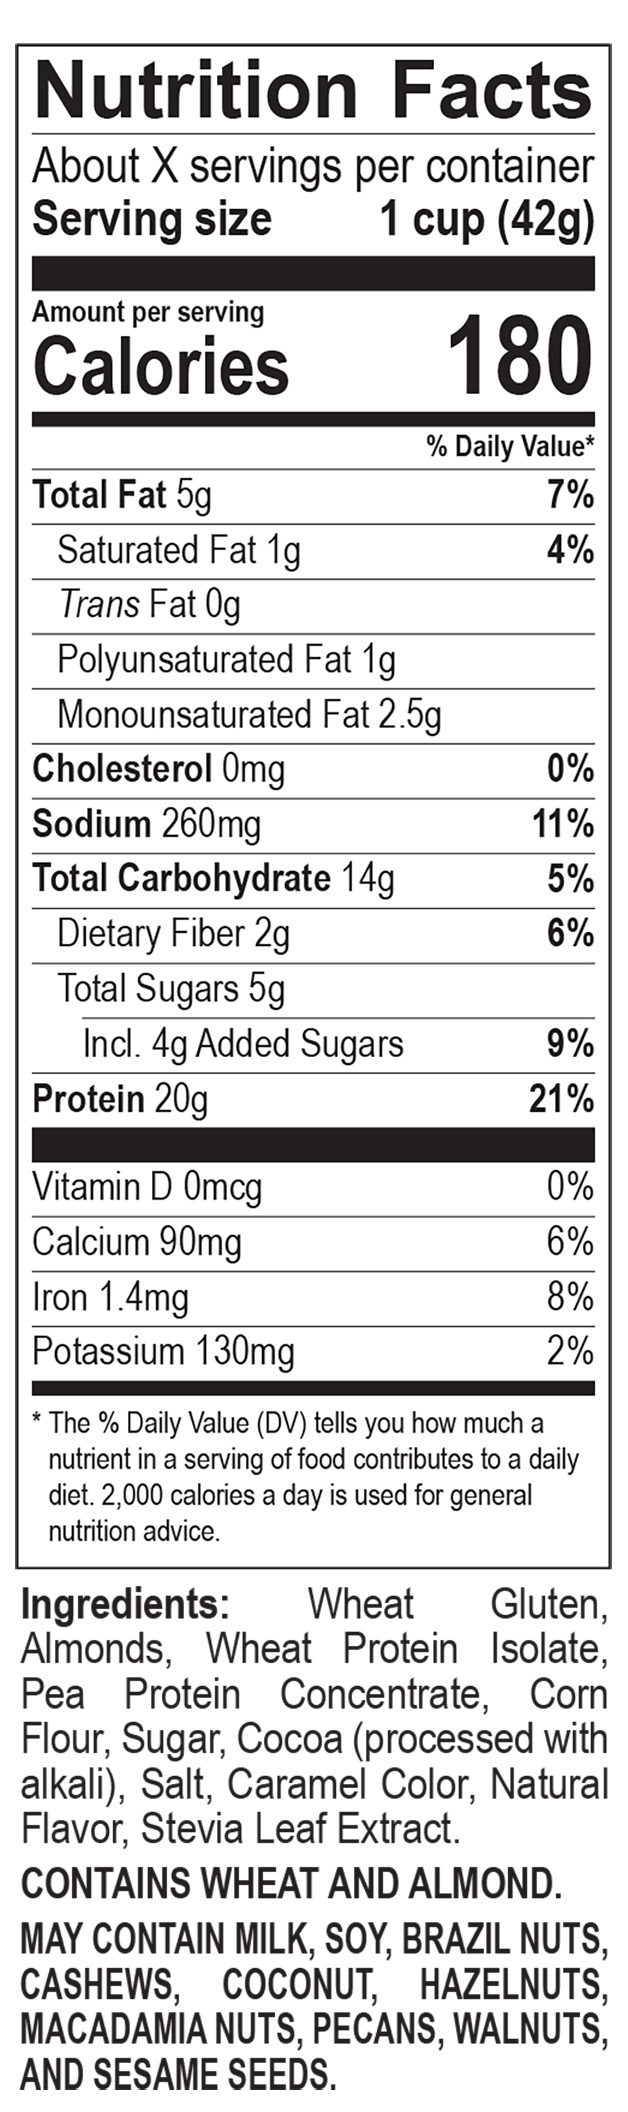 Premier Protein Chocolate Almond Cereal Nutrition Facts Panel